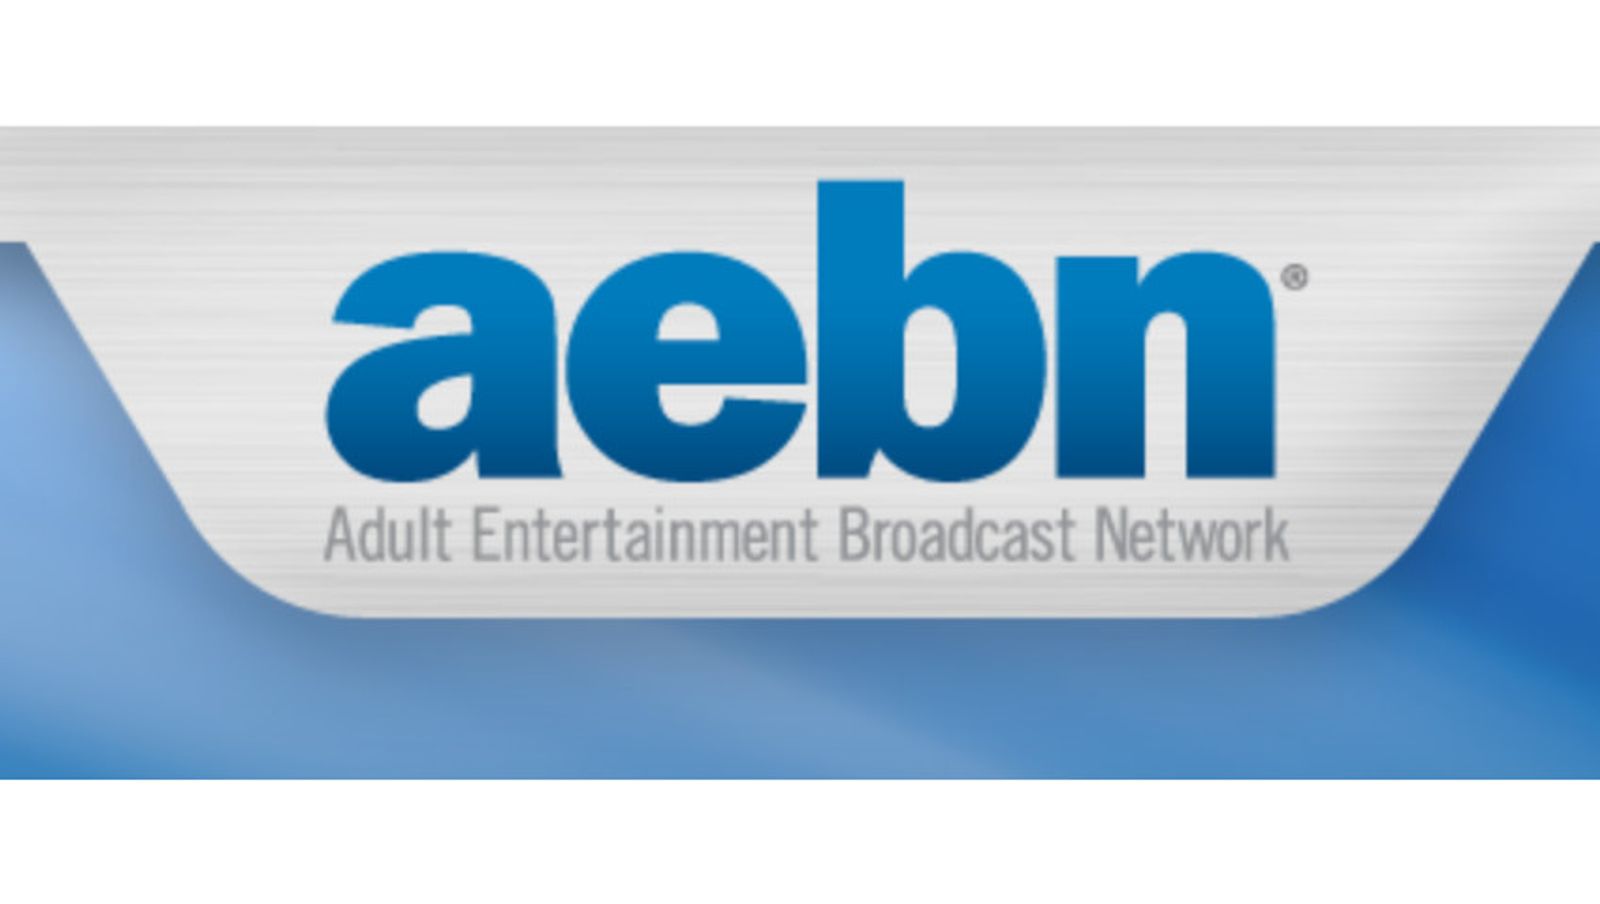 AEBN Announces Talent Lineup for AVN Show